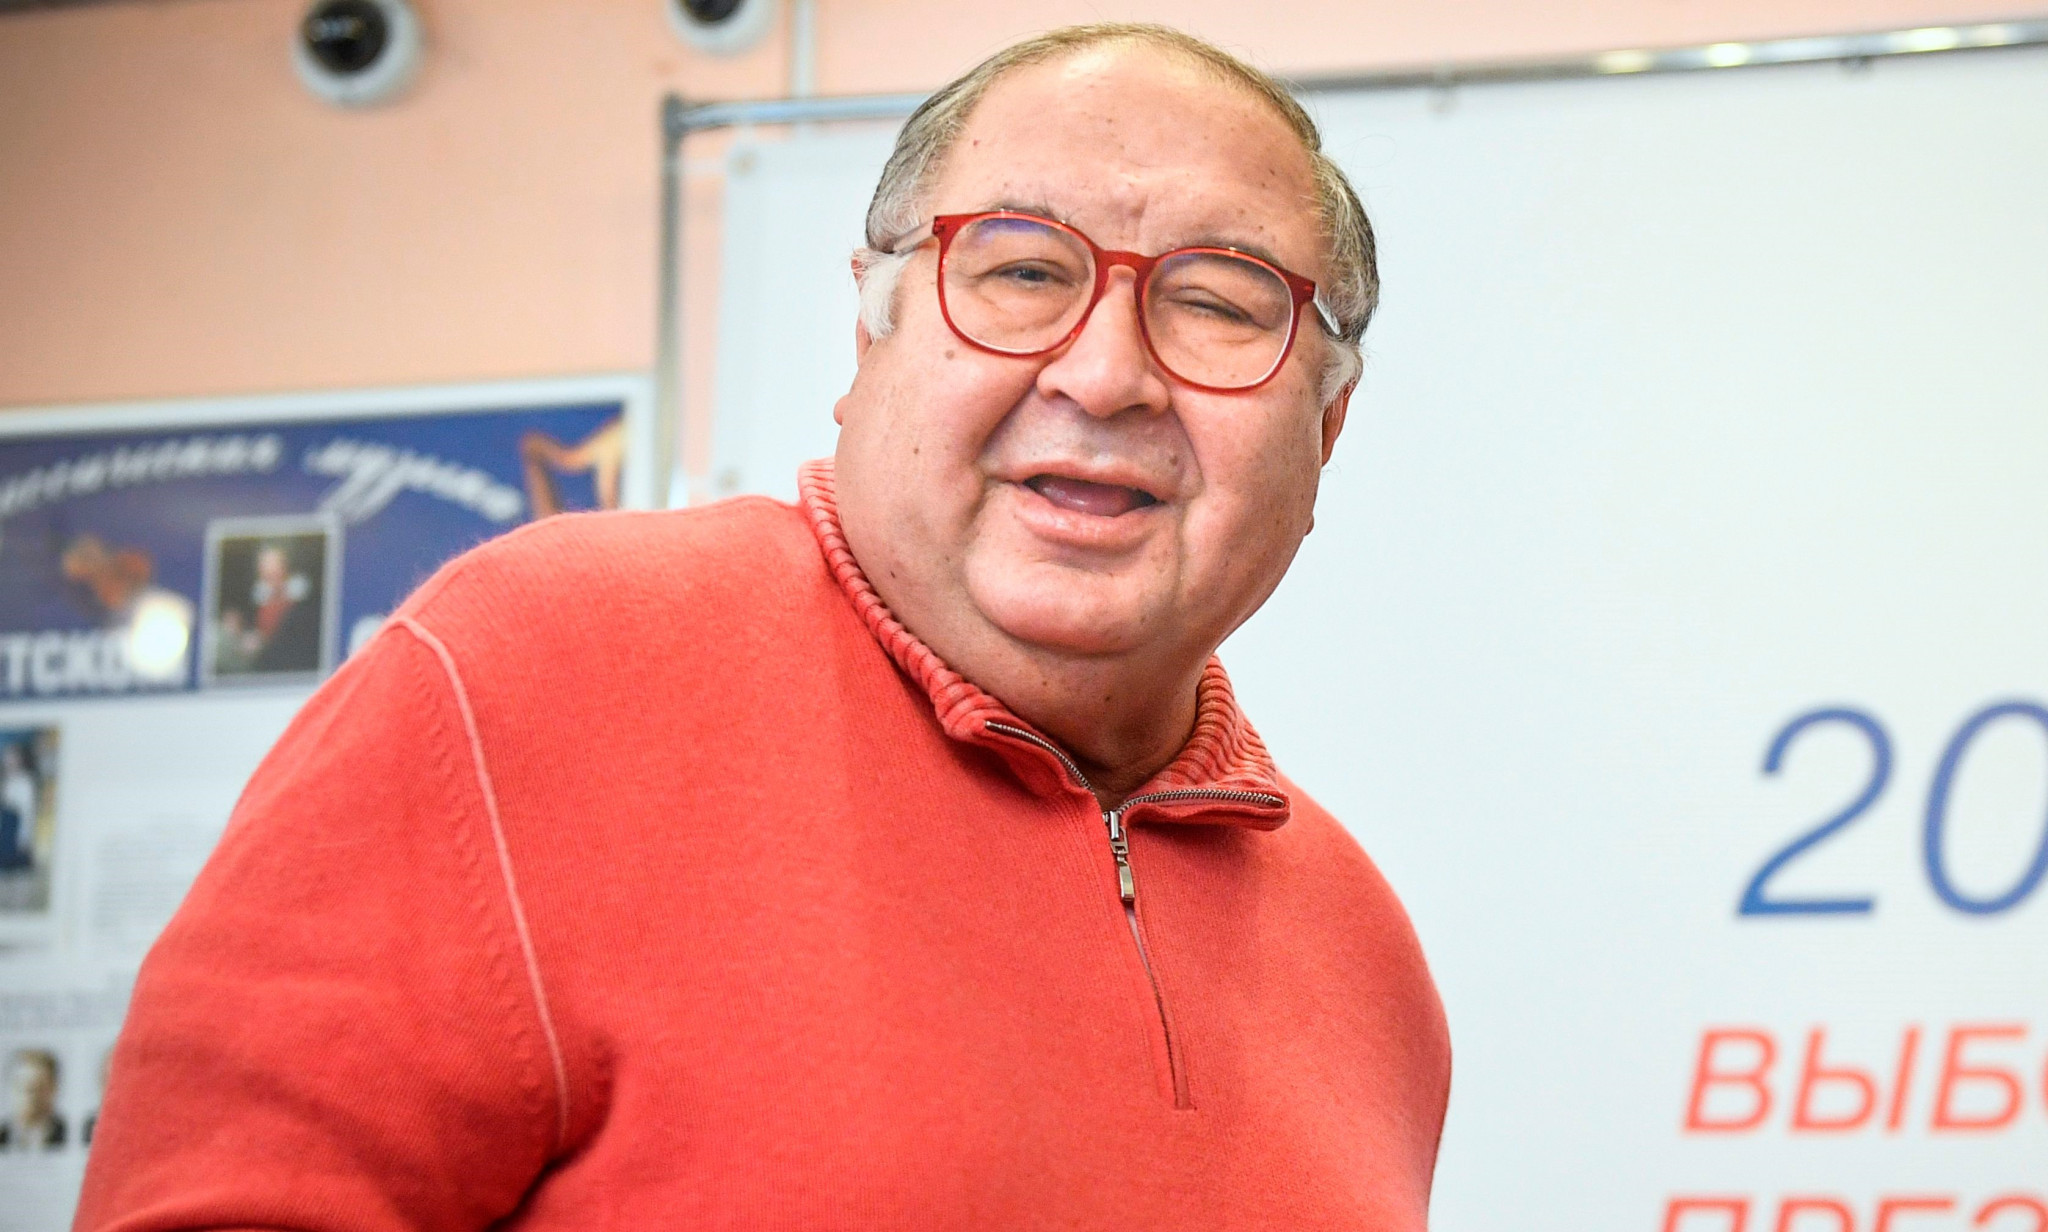 Alisher Usmanov has led the FIE since 2008 ©Getty Images